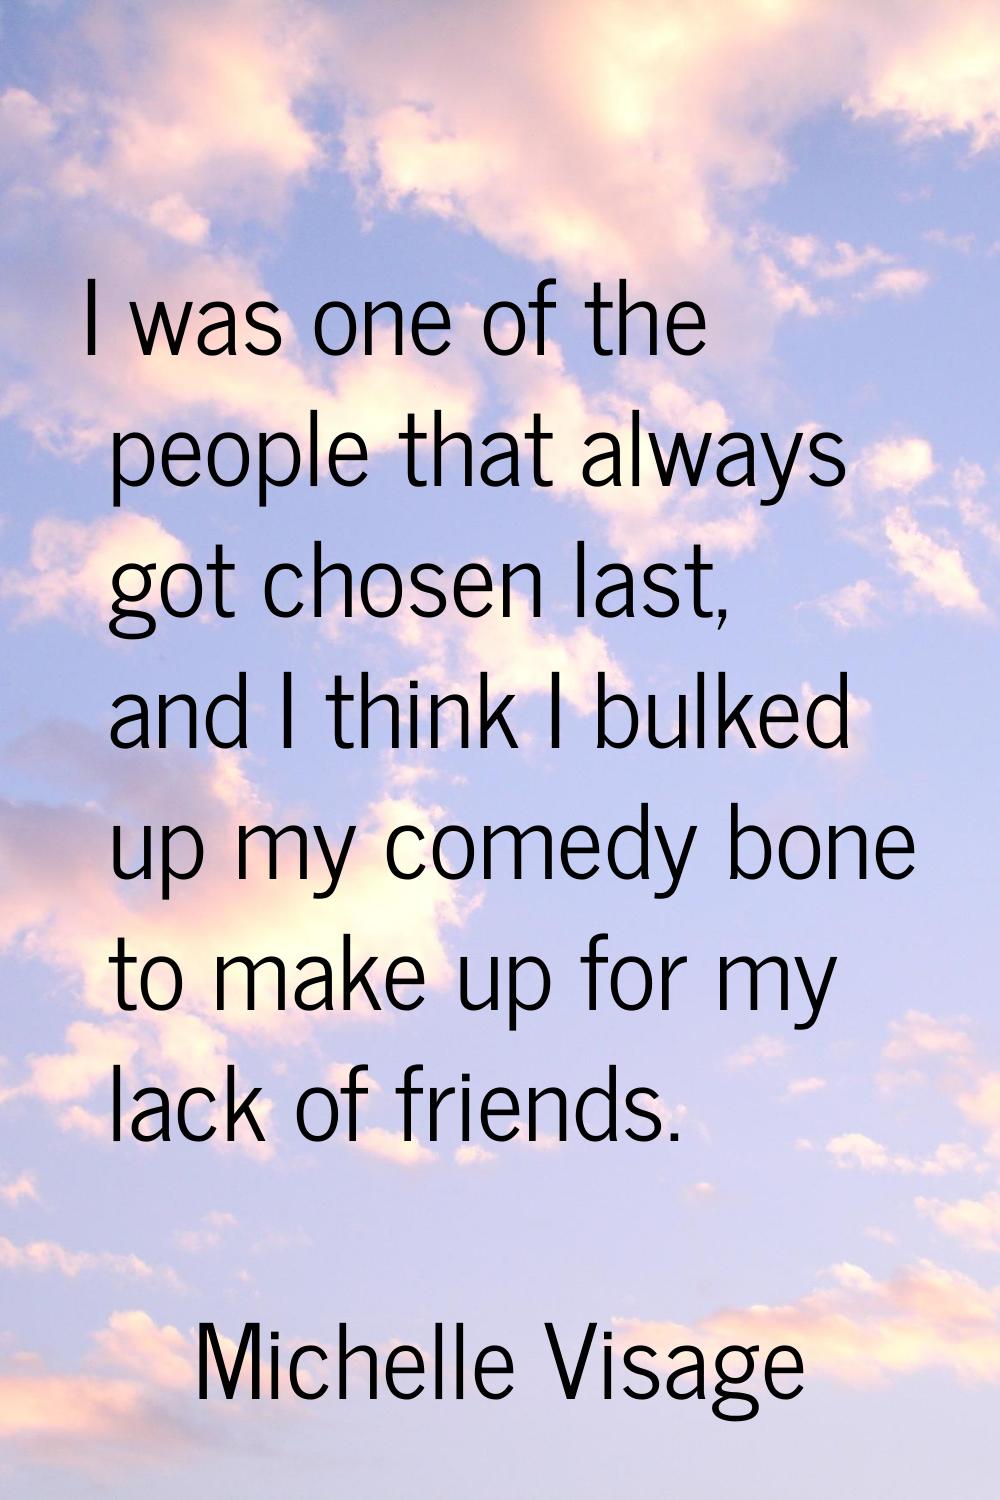 I was one of the people that always got chosen last, and I think I bulked up my comedy bone to make